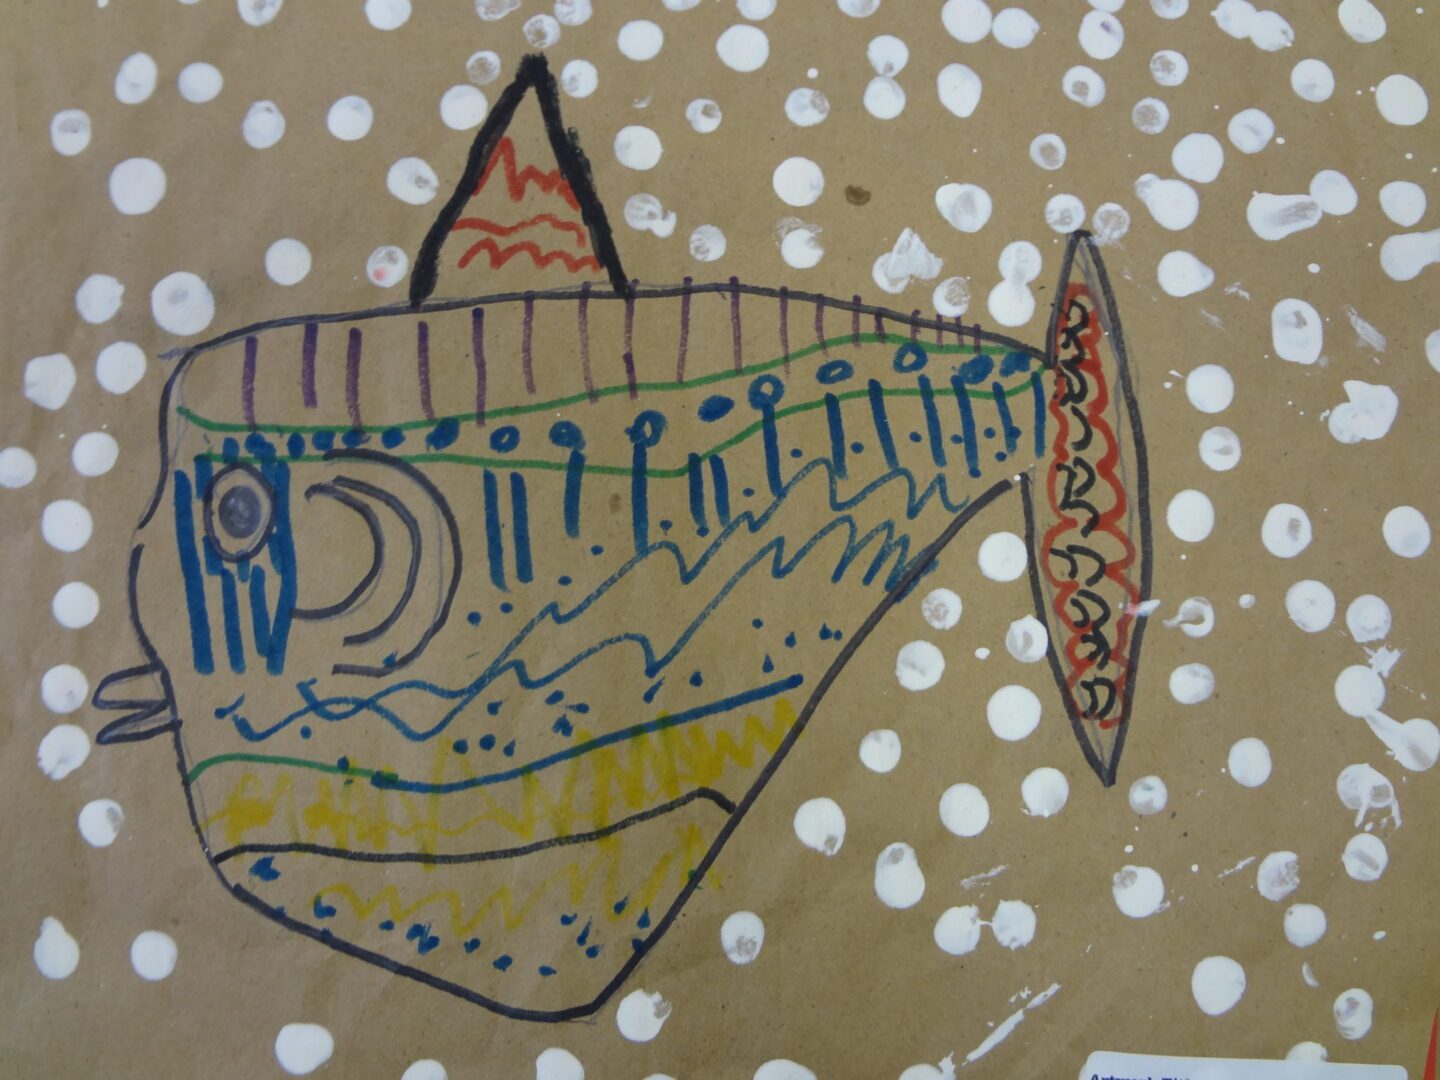 A drawing of a fish on brown paper.